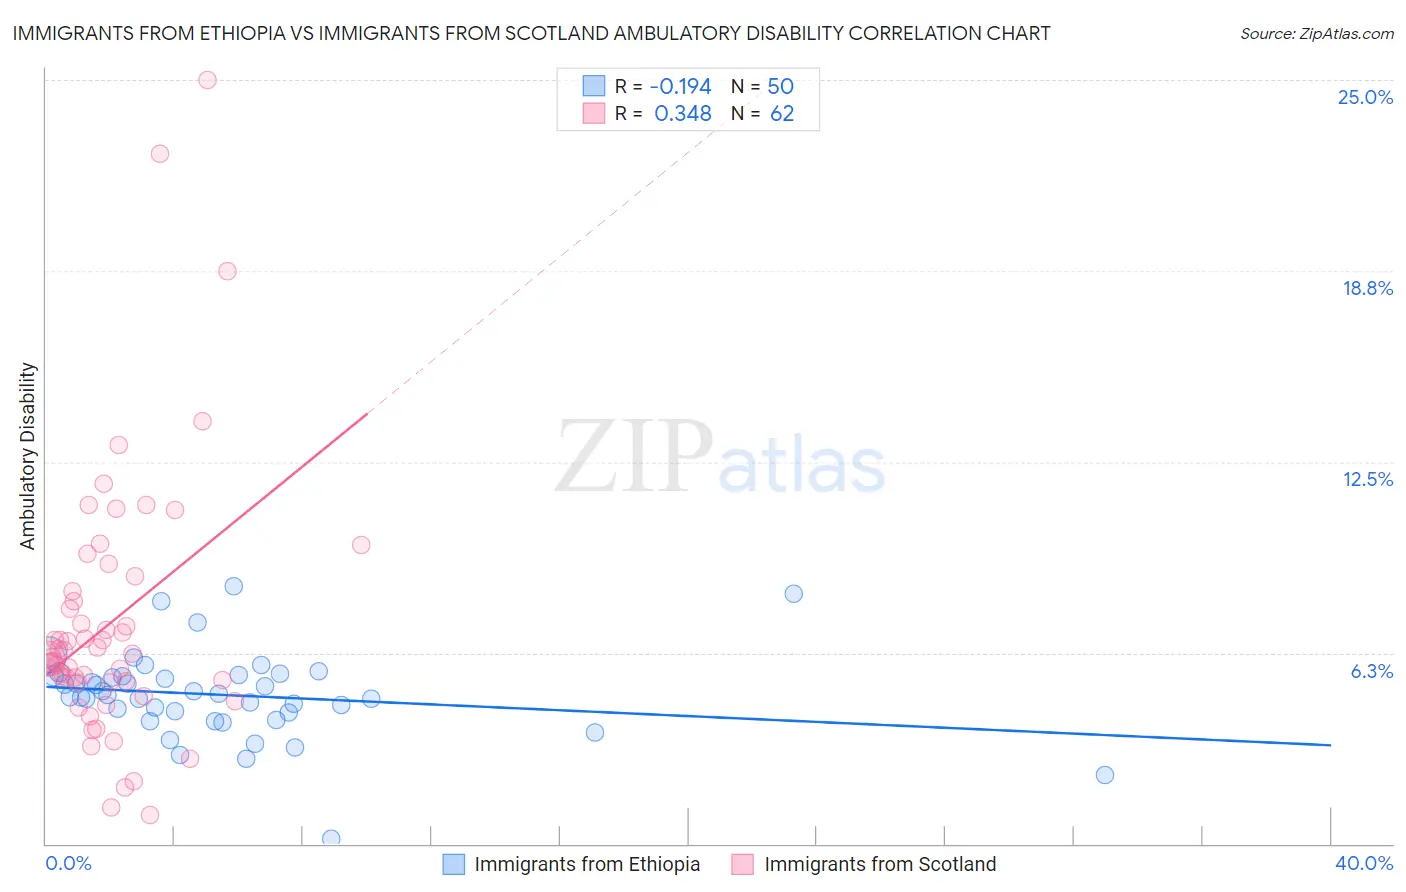 Immigrants from Ethiopia vs Immigrants from Scotland Ambulatory Disability